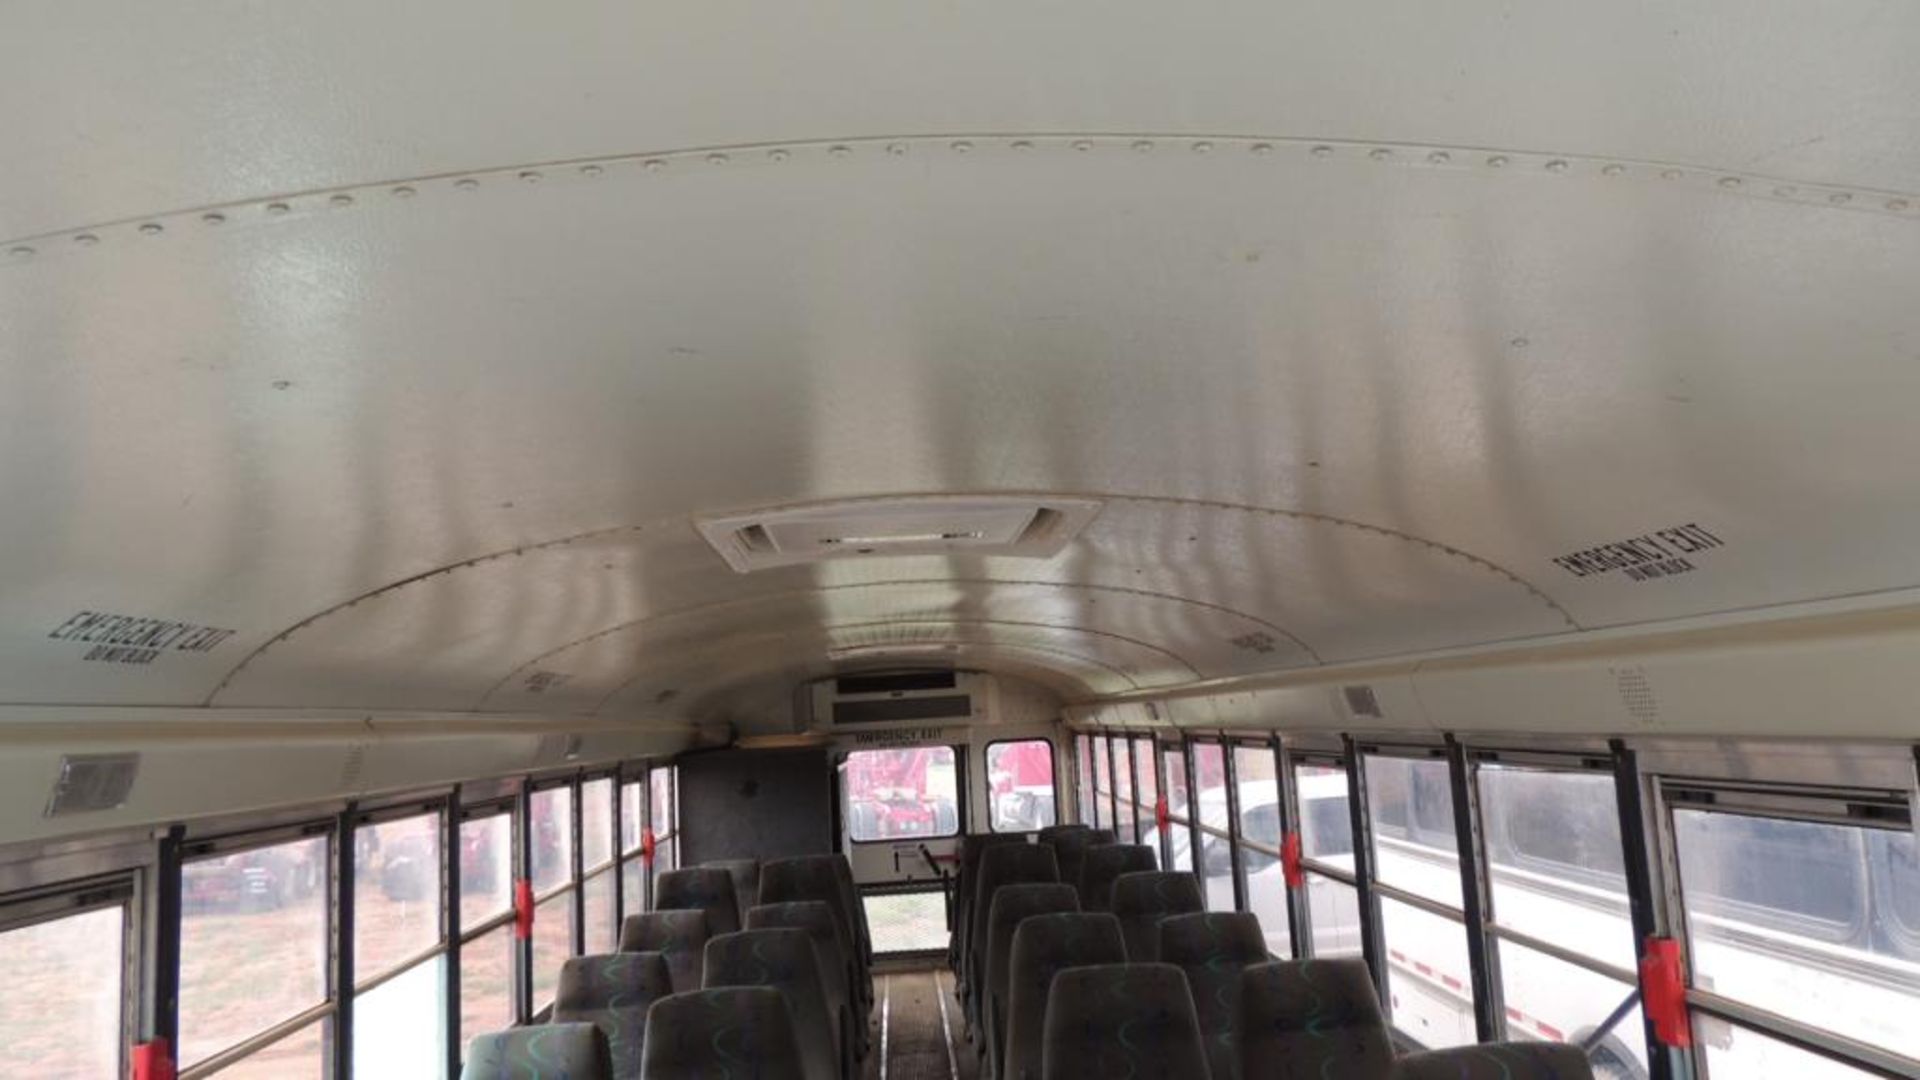 IC Commercial Passenger Bus - Image 12 of 17